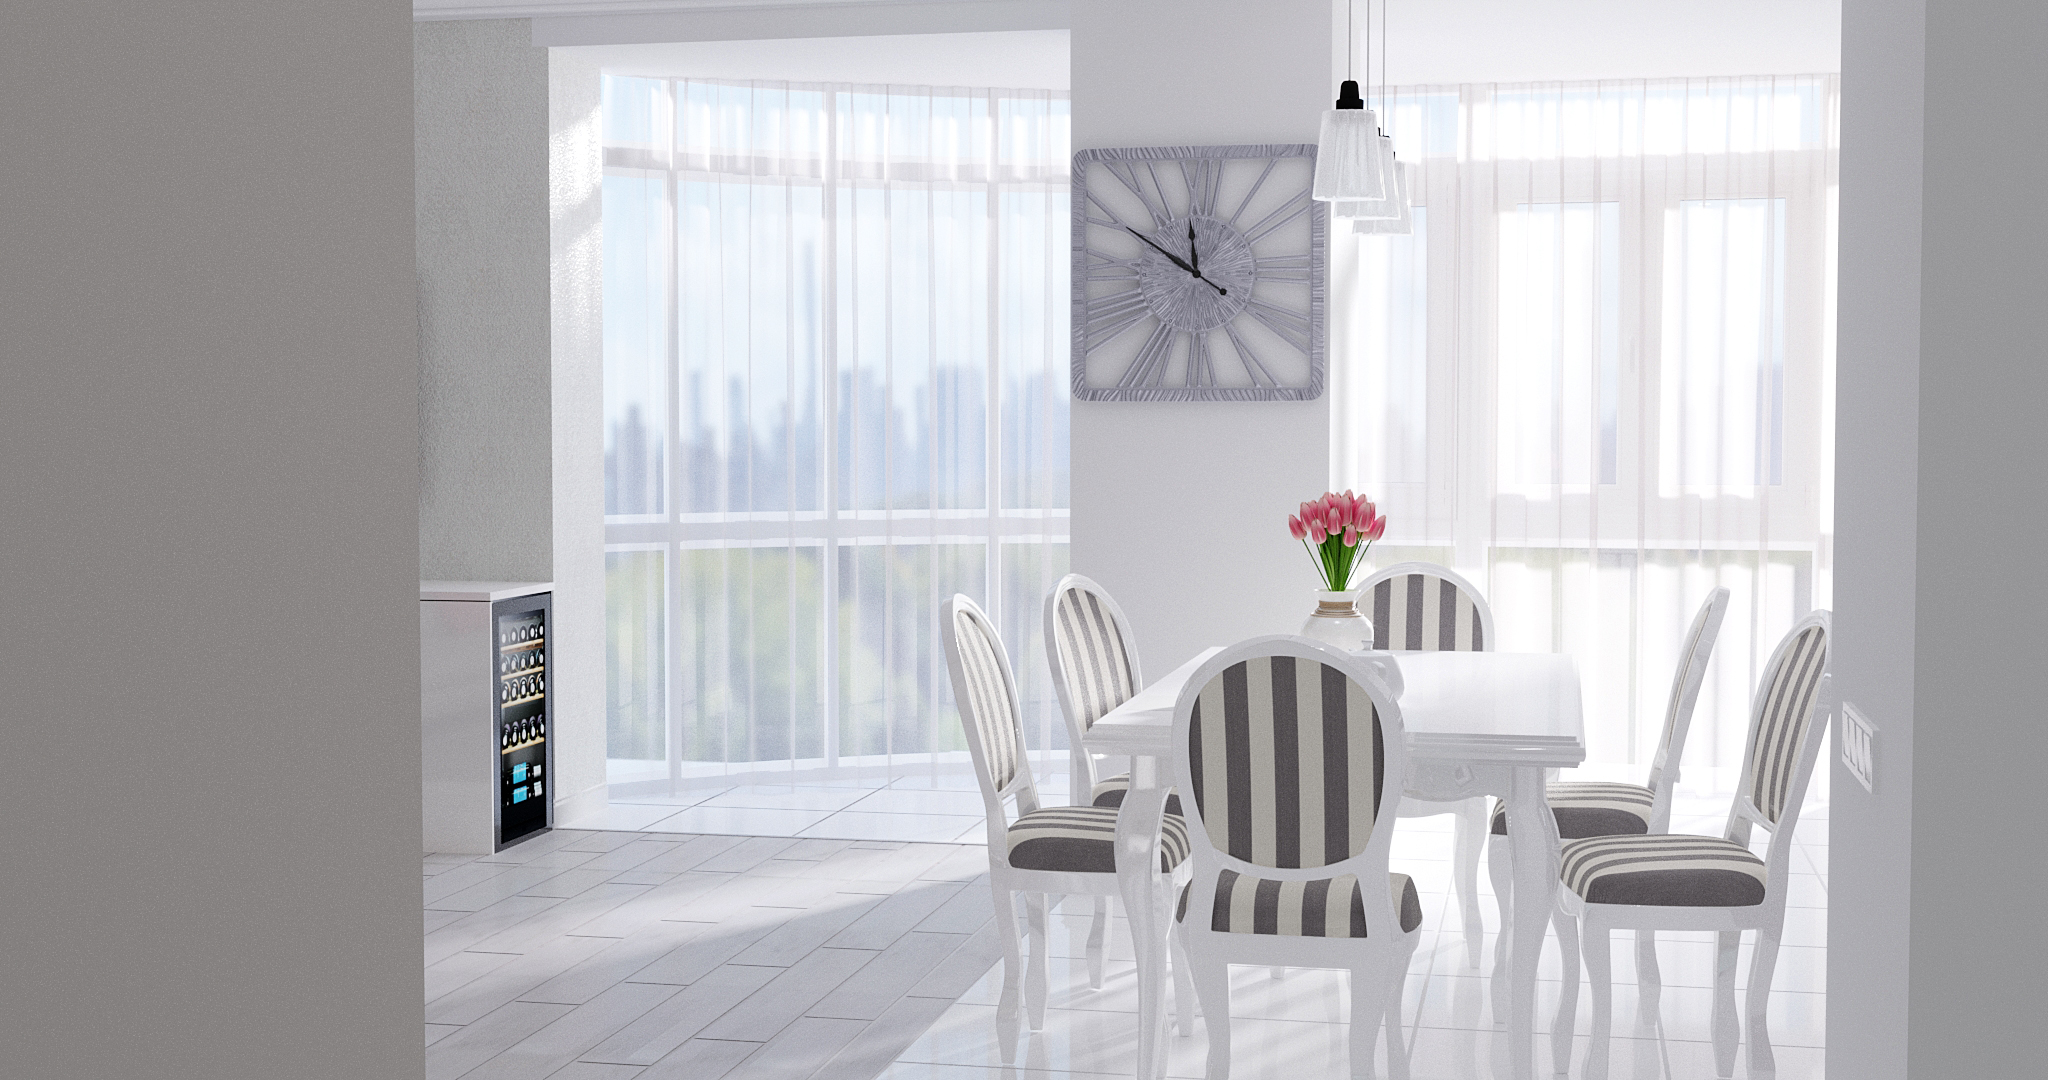 Kitchen-living room "Tenderness" in 3d max vray 3.0 image